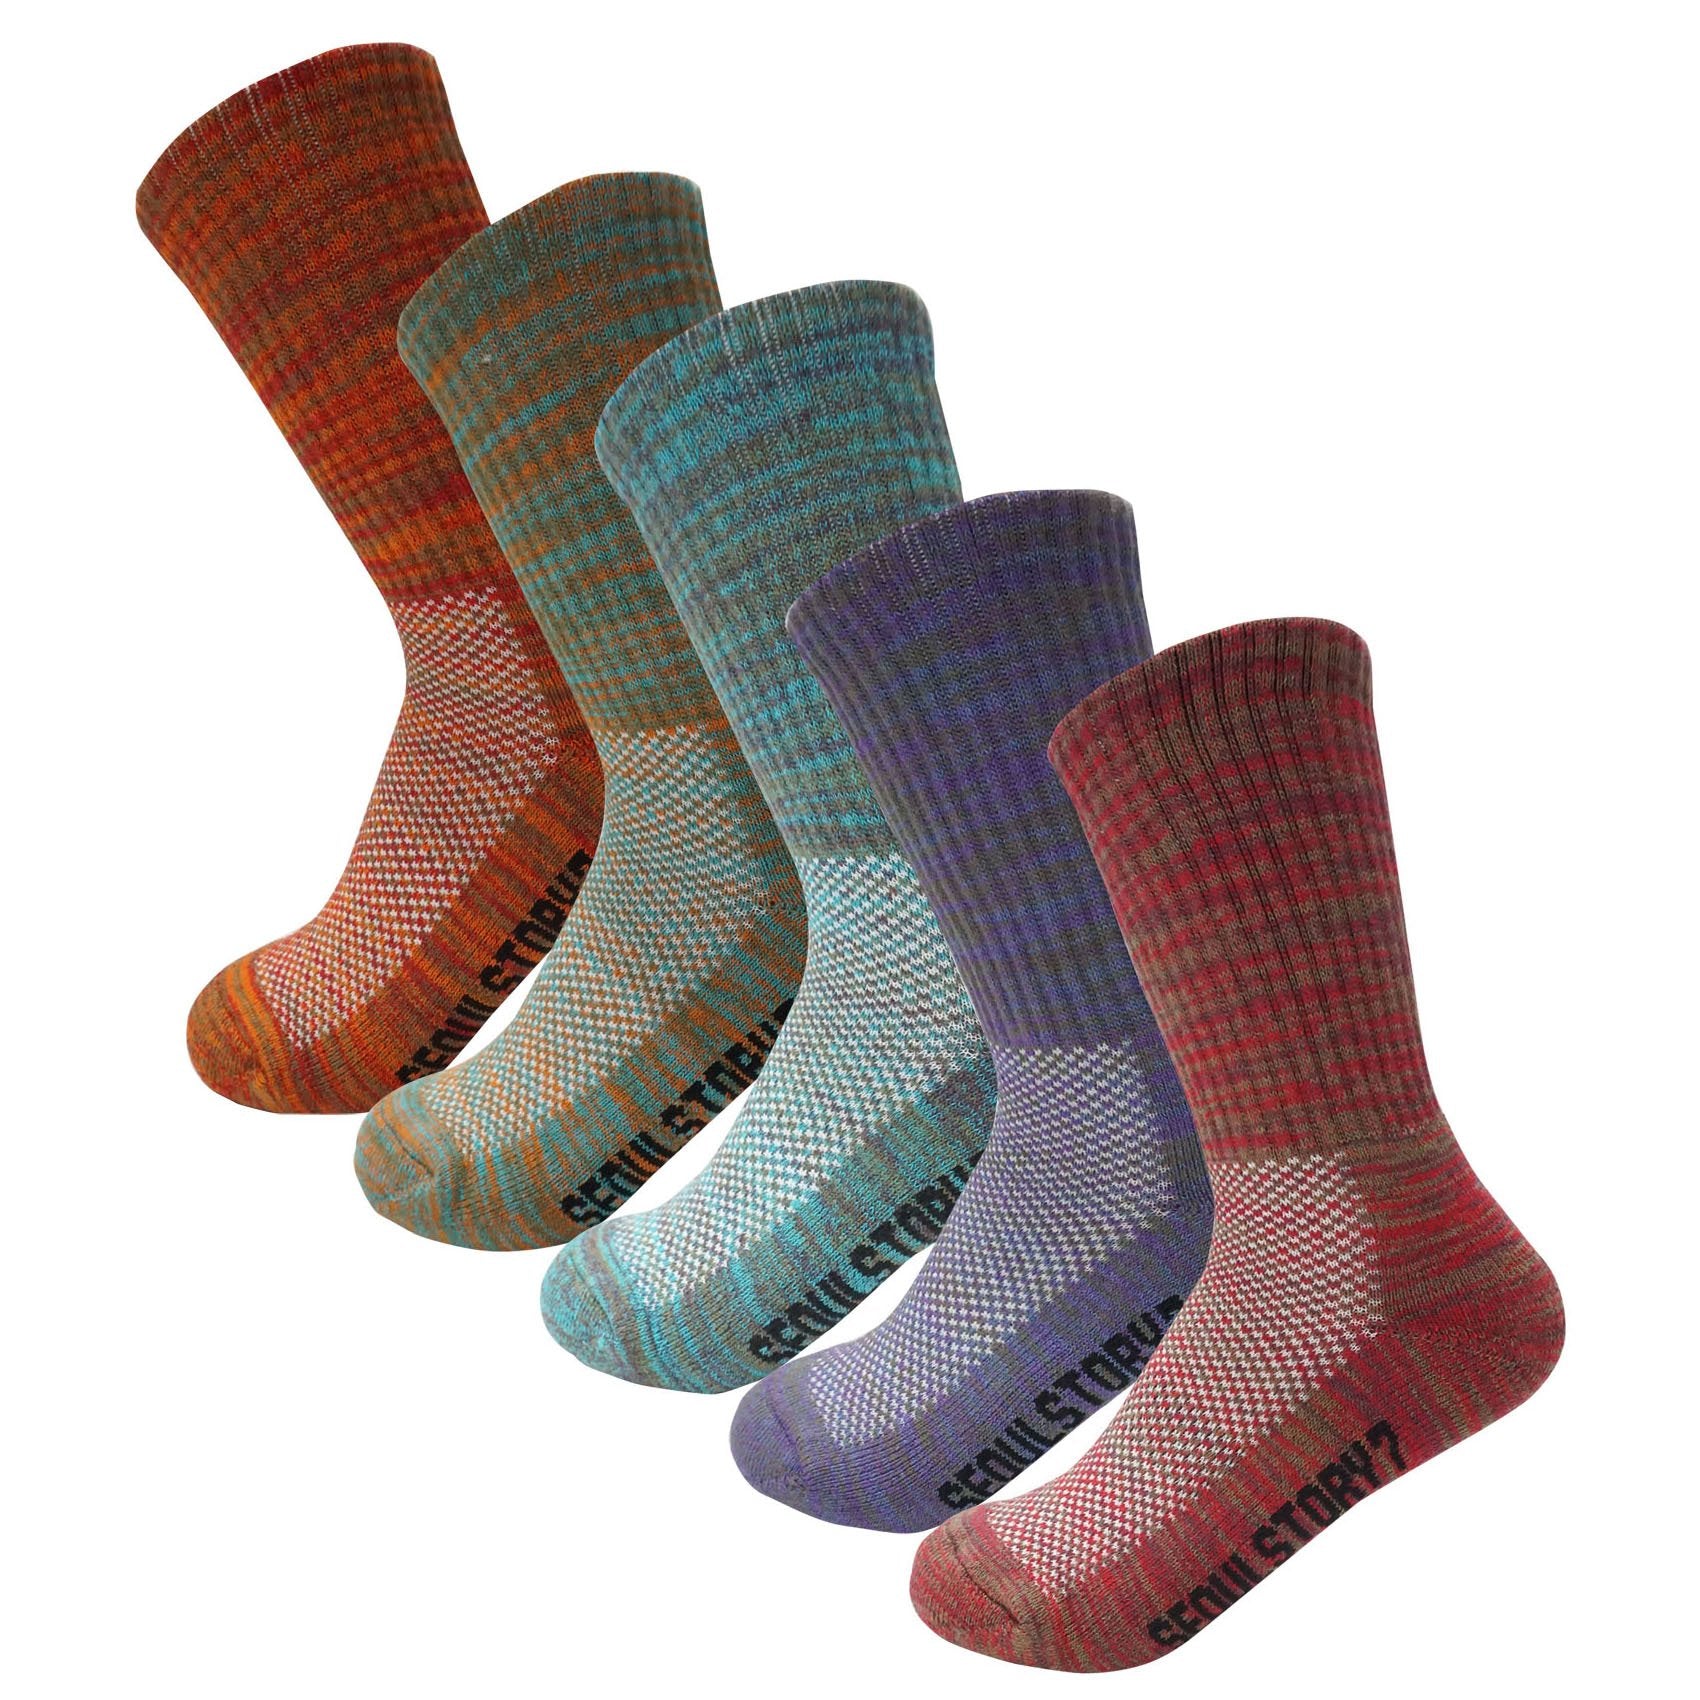 5Pack Women's Multi Performance Terry Cushion Hiking/Outdoor Crew Socks Multi Color